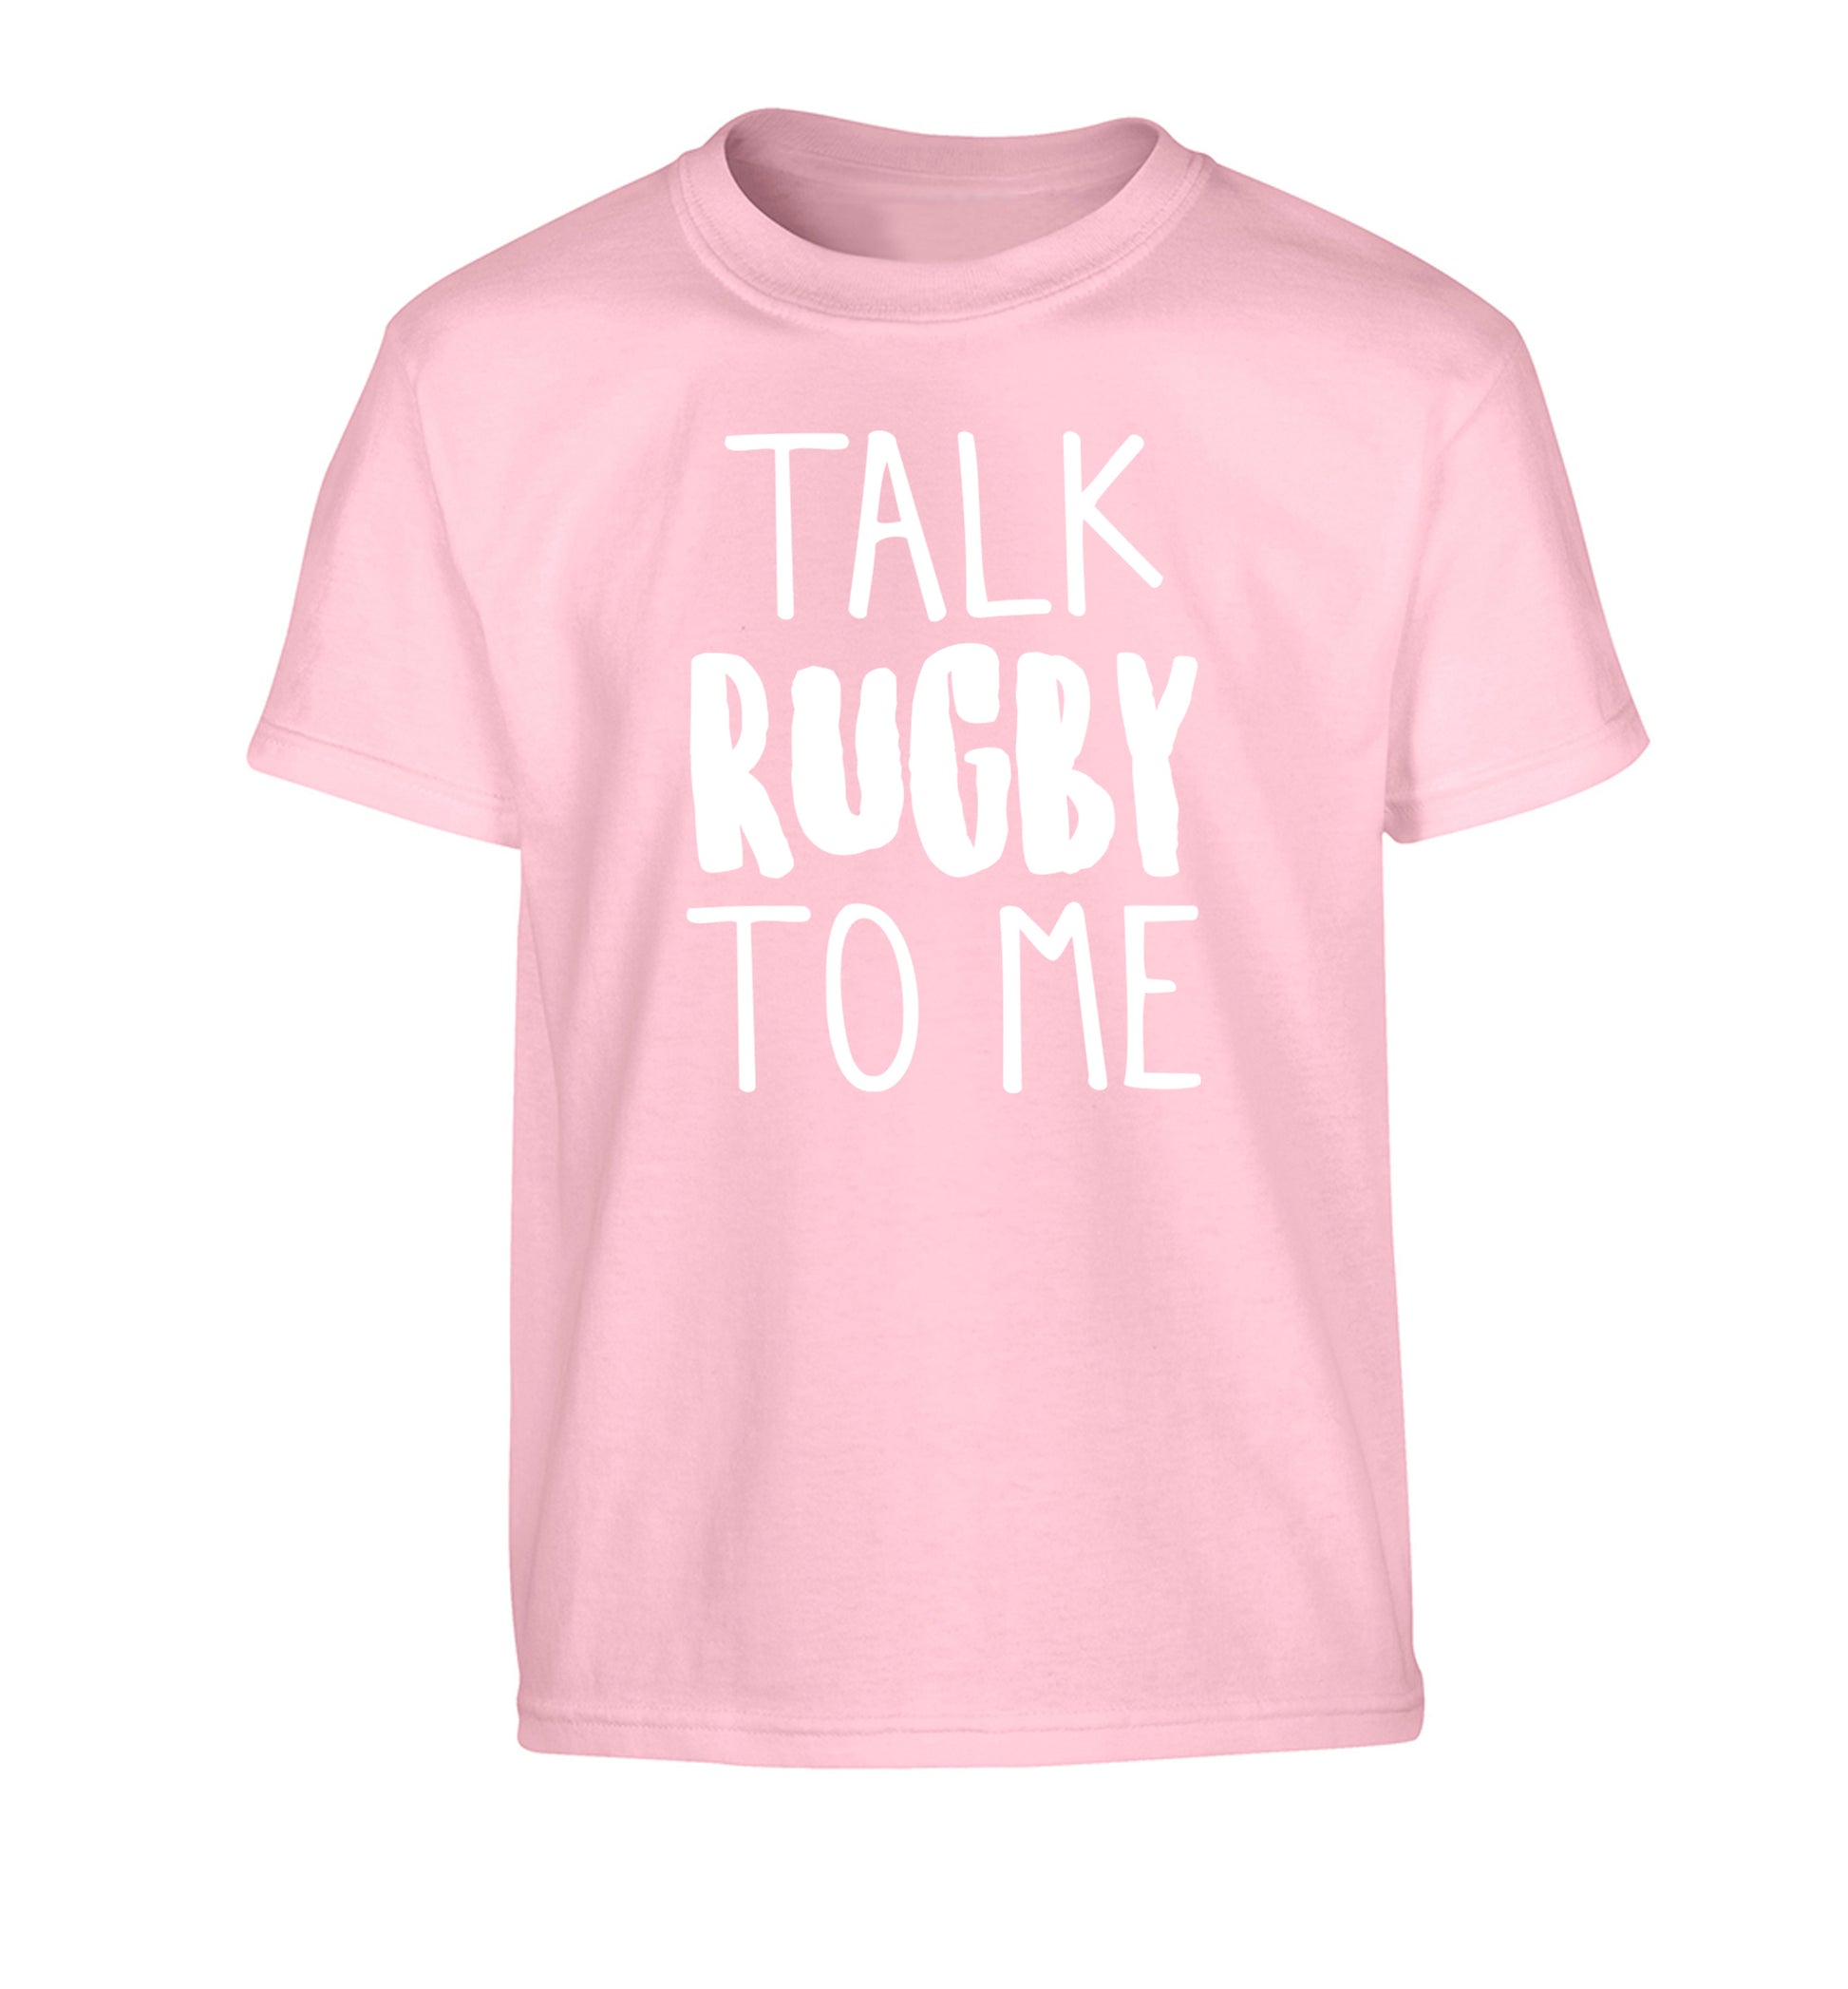 Talk rugby to me Children's light pink Tshirt 12-13 Years